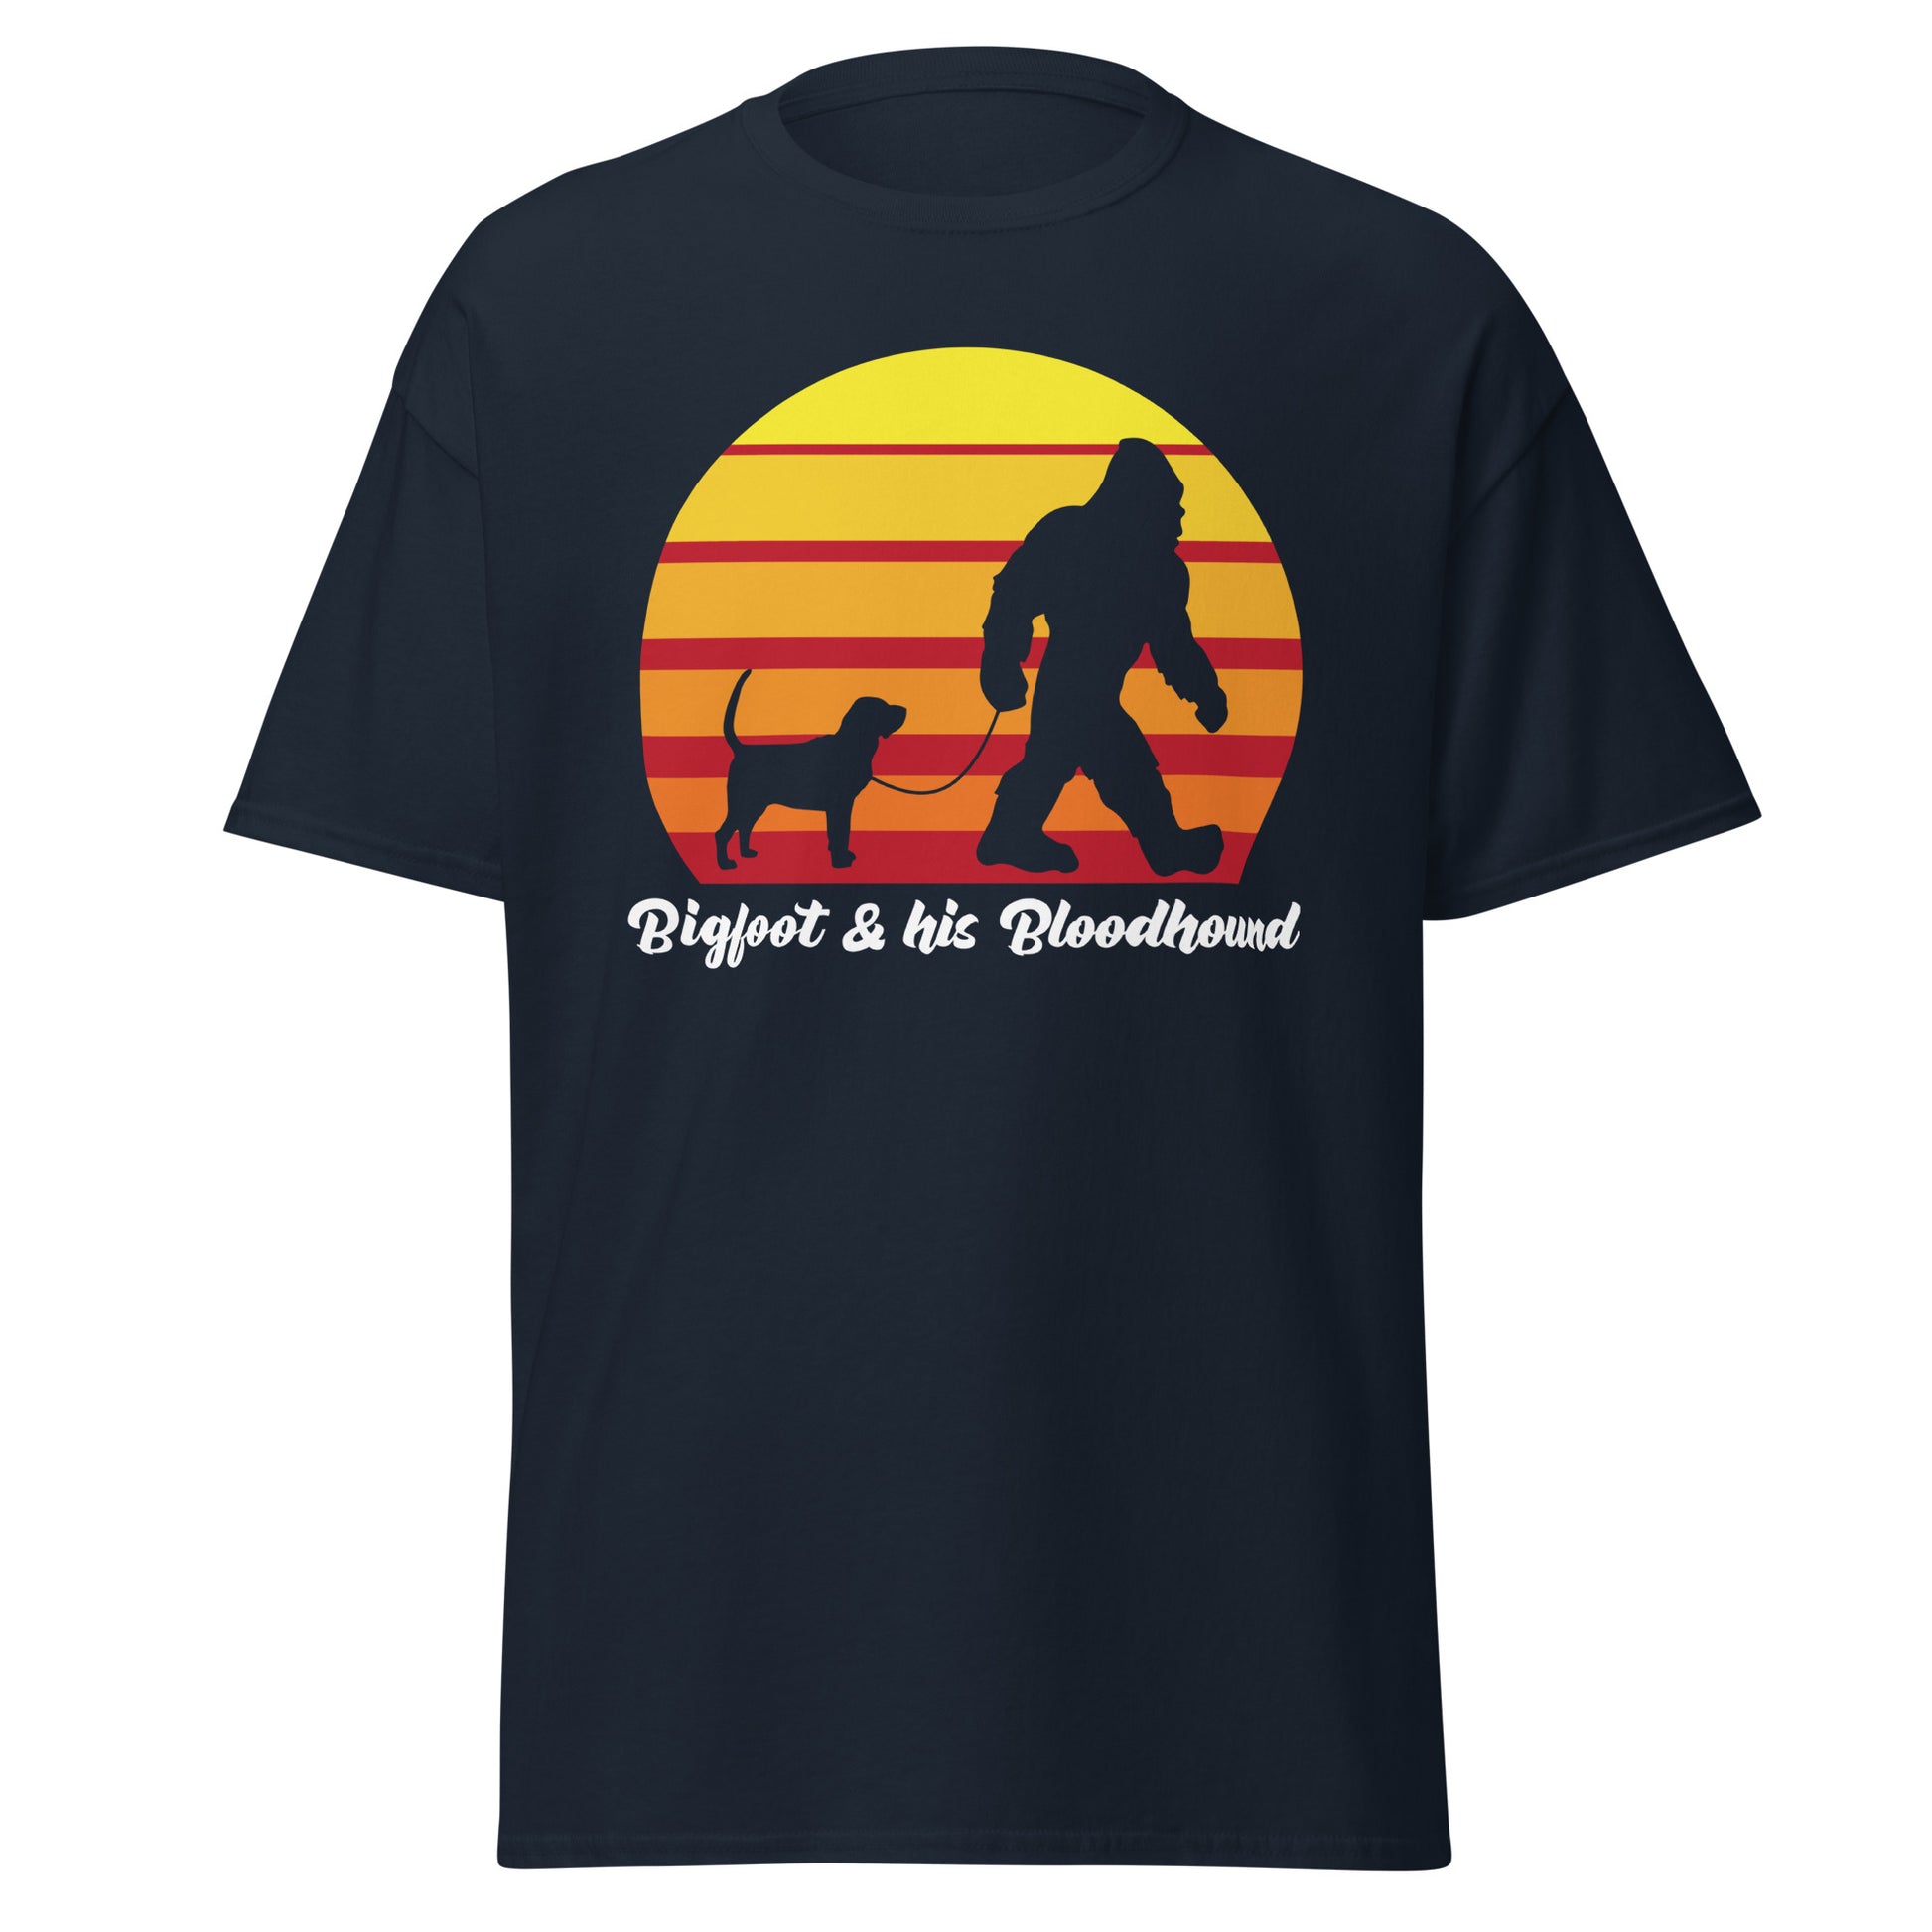 Big foot and his Bloodhound men’s navy t-shirt by Dog Artistry.